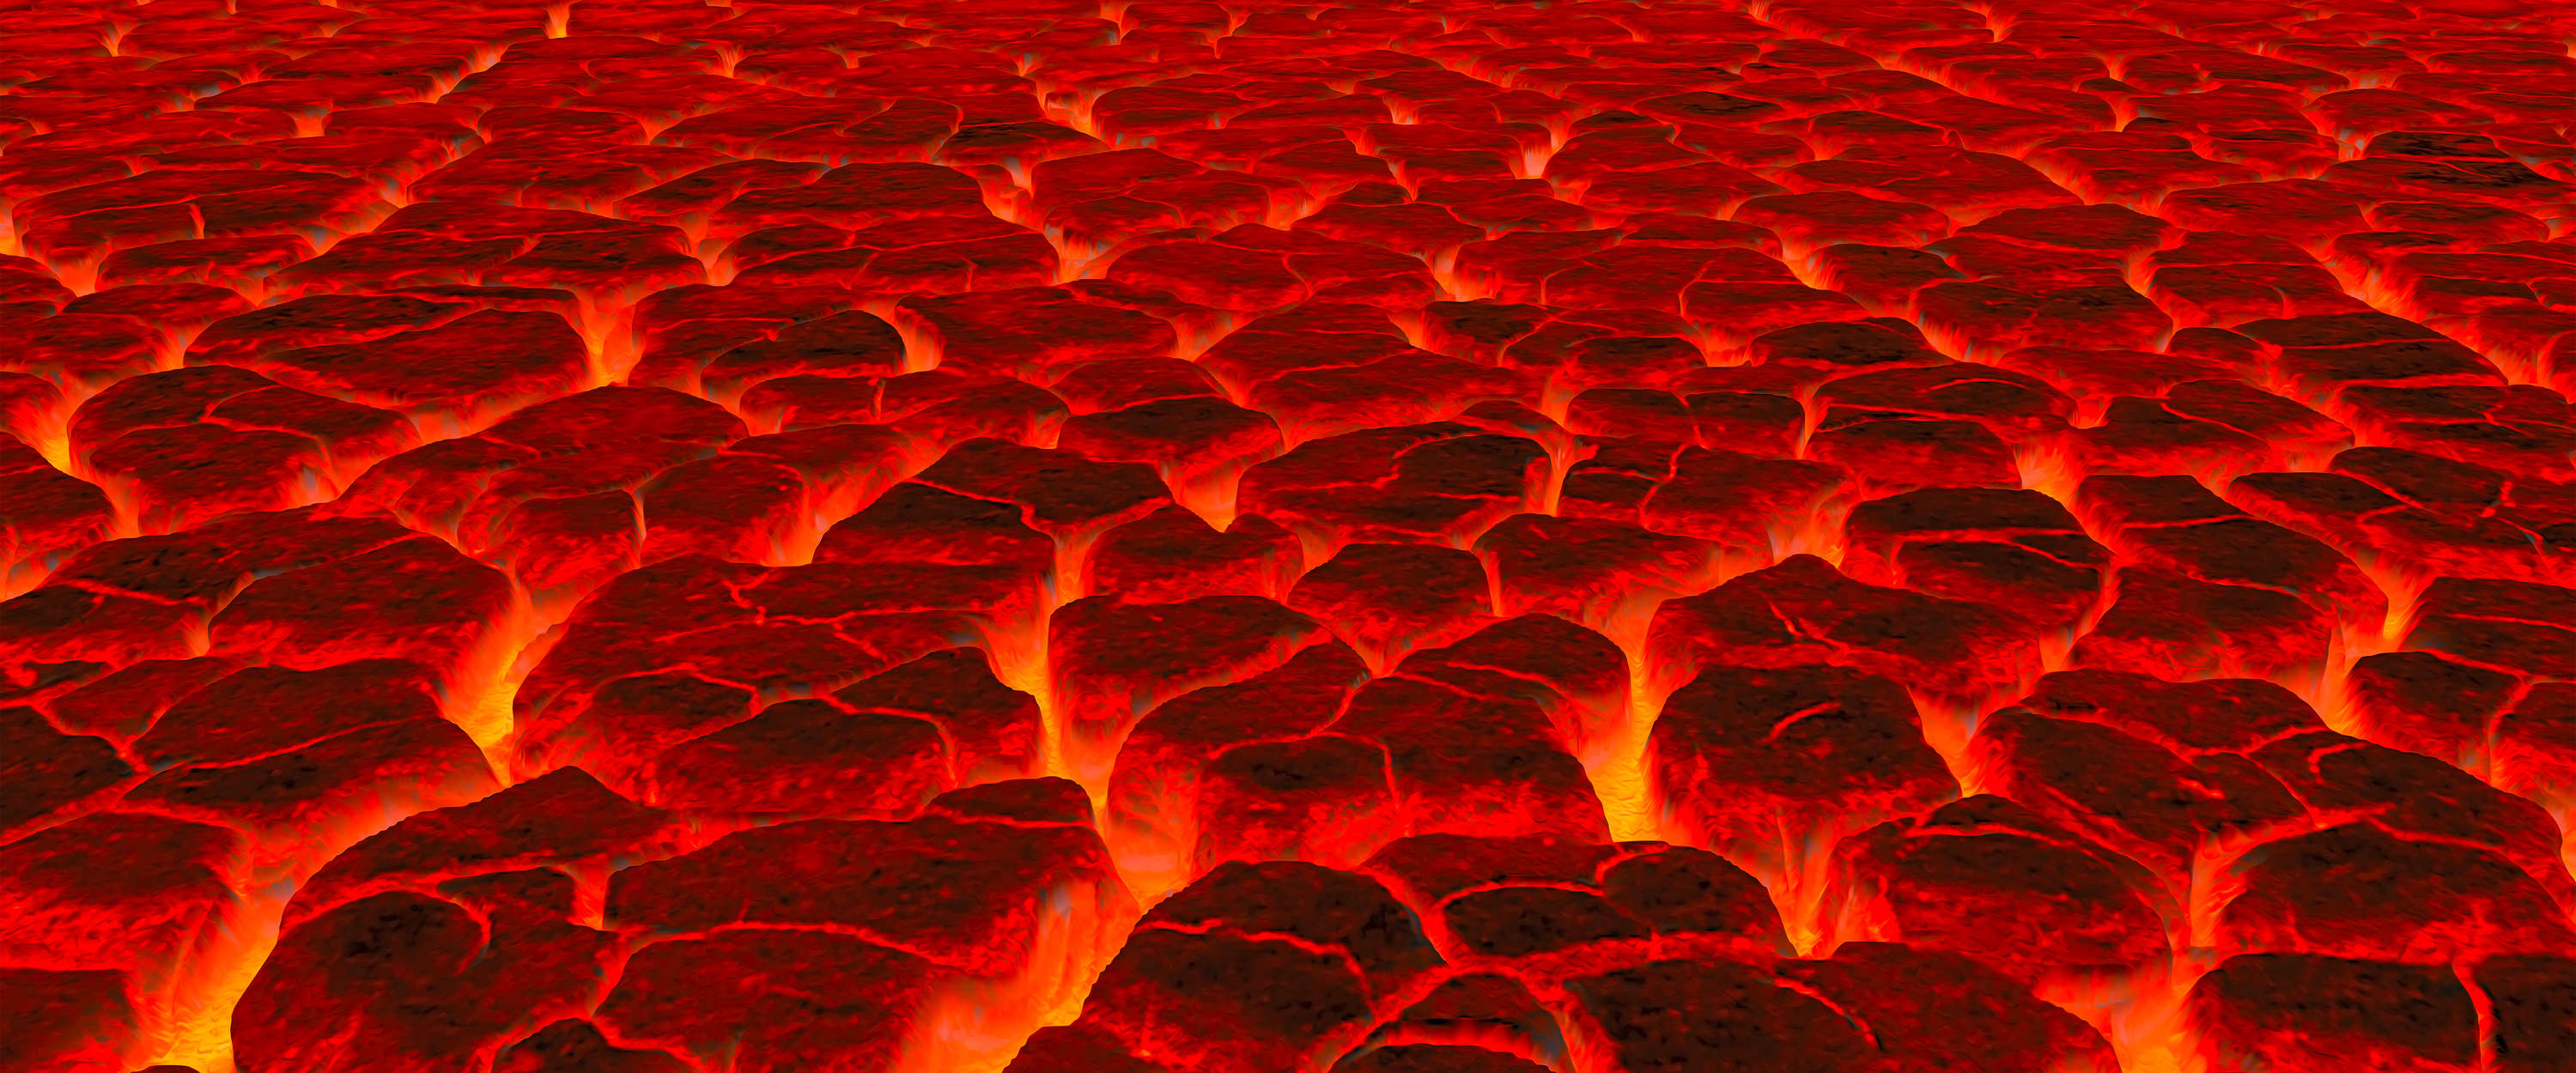             Lava mural with glowing field & magma flow
        